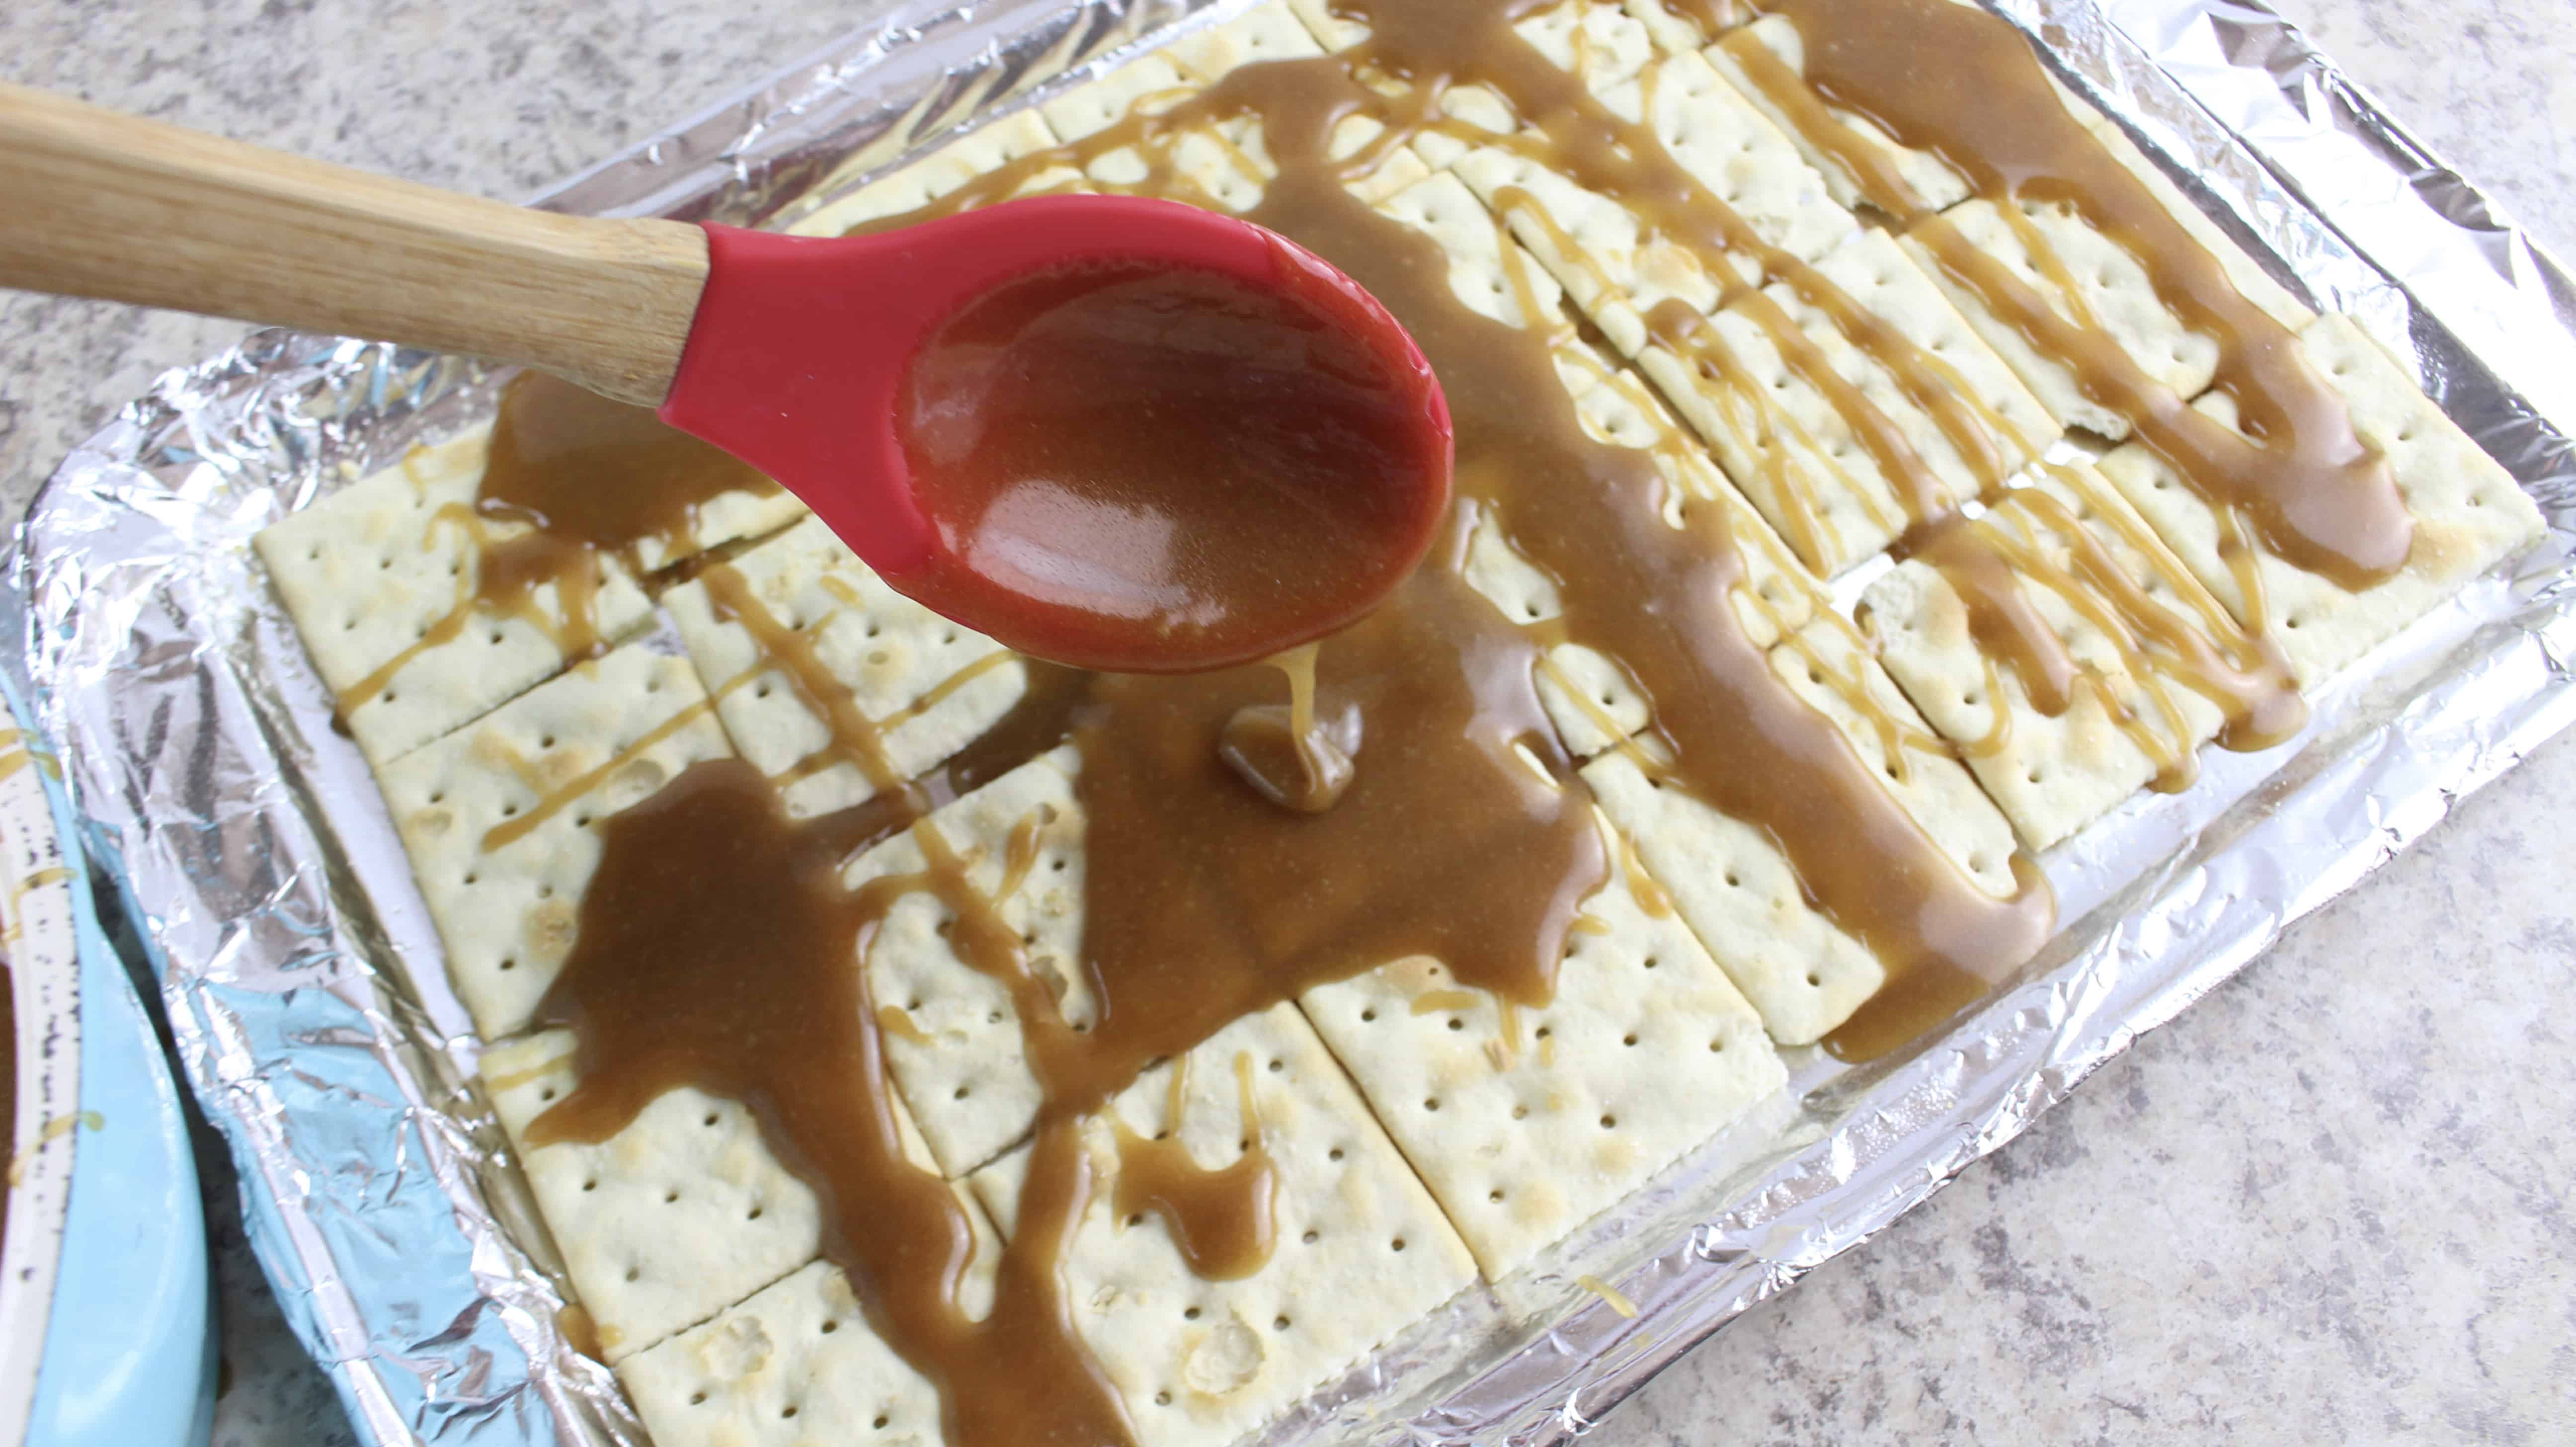 spoon pouring toffee on the crackers